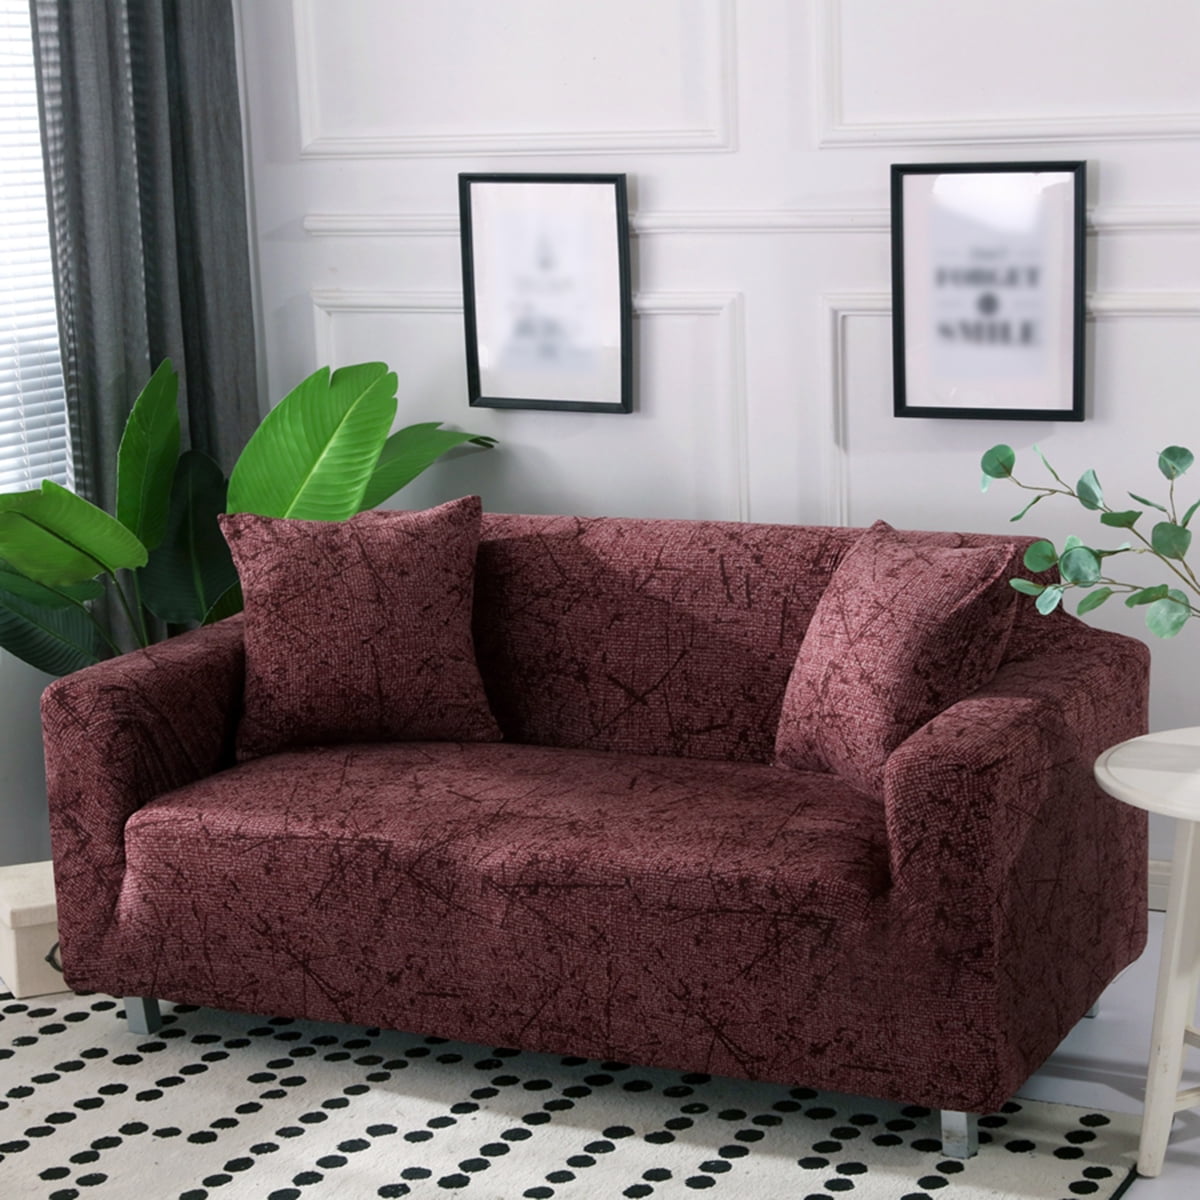 Loveseat, Burgundy Jacquard Sofa Cover for Loveseat 1 Piece Burgundy Couch Covers for Living Room Loveseat Slipcovers with Elastic Bottom Furniture Protector Cover for Leather Sofa and Couch